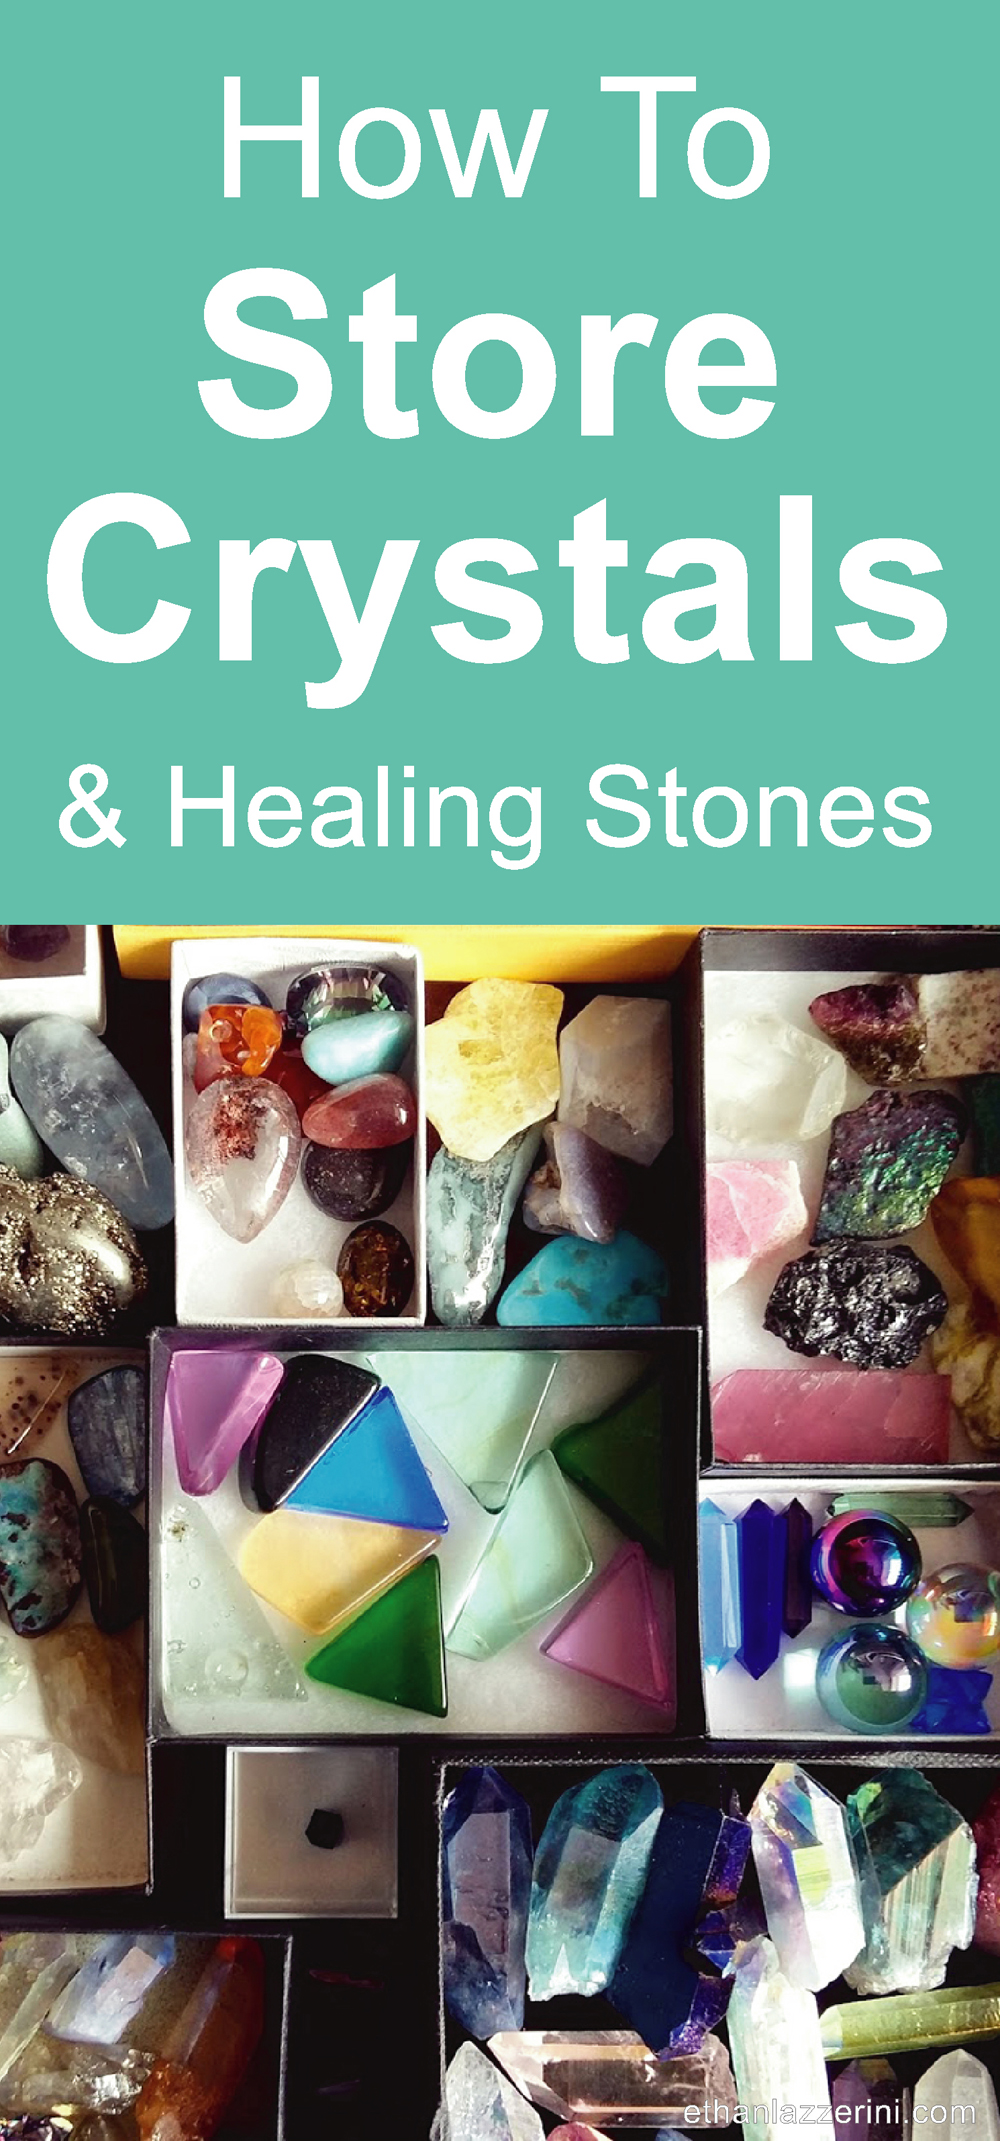 How to store crystals and healing stones blog article by Ethan Lazzerini